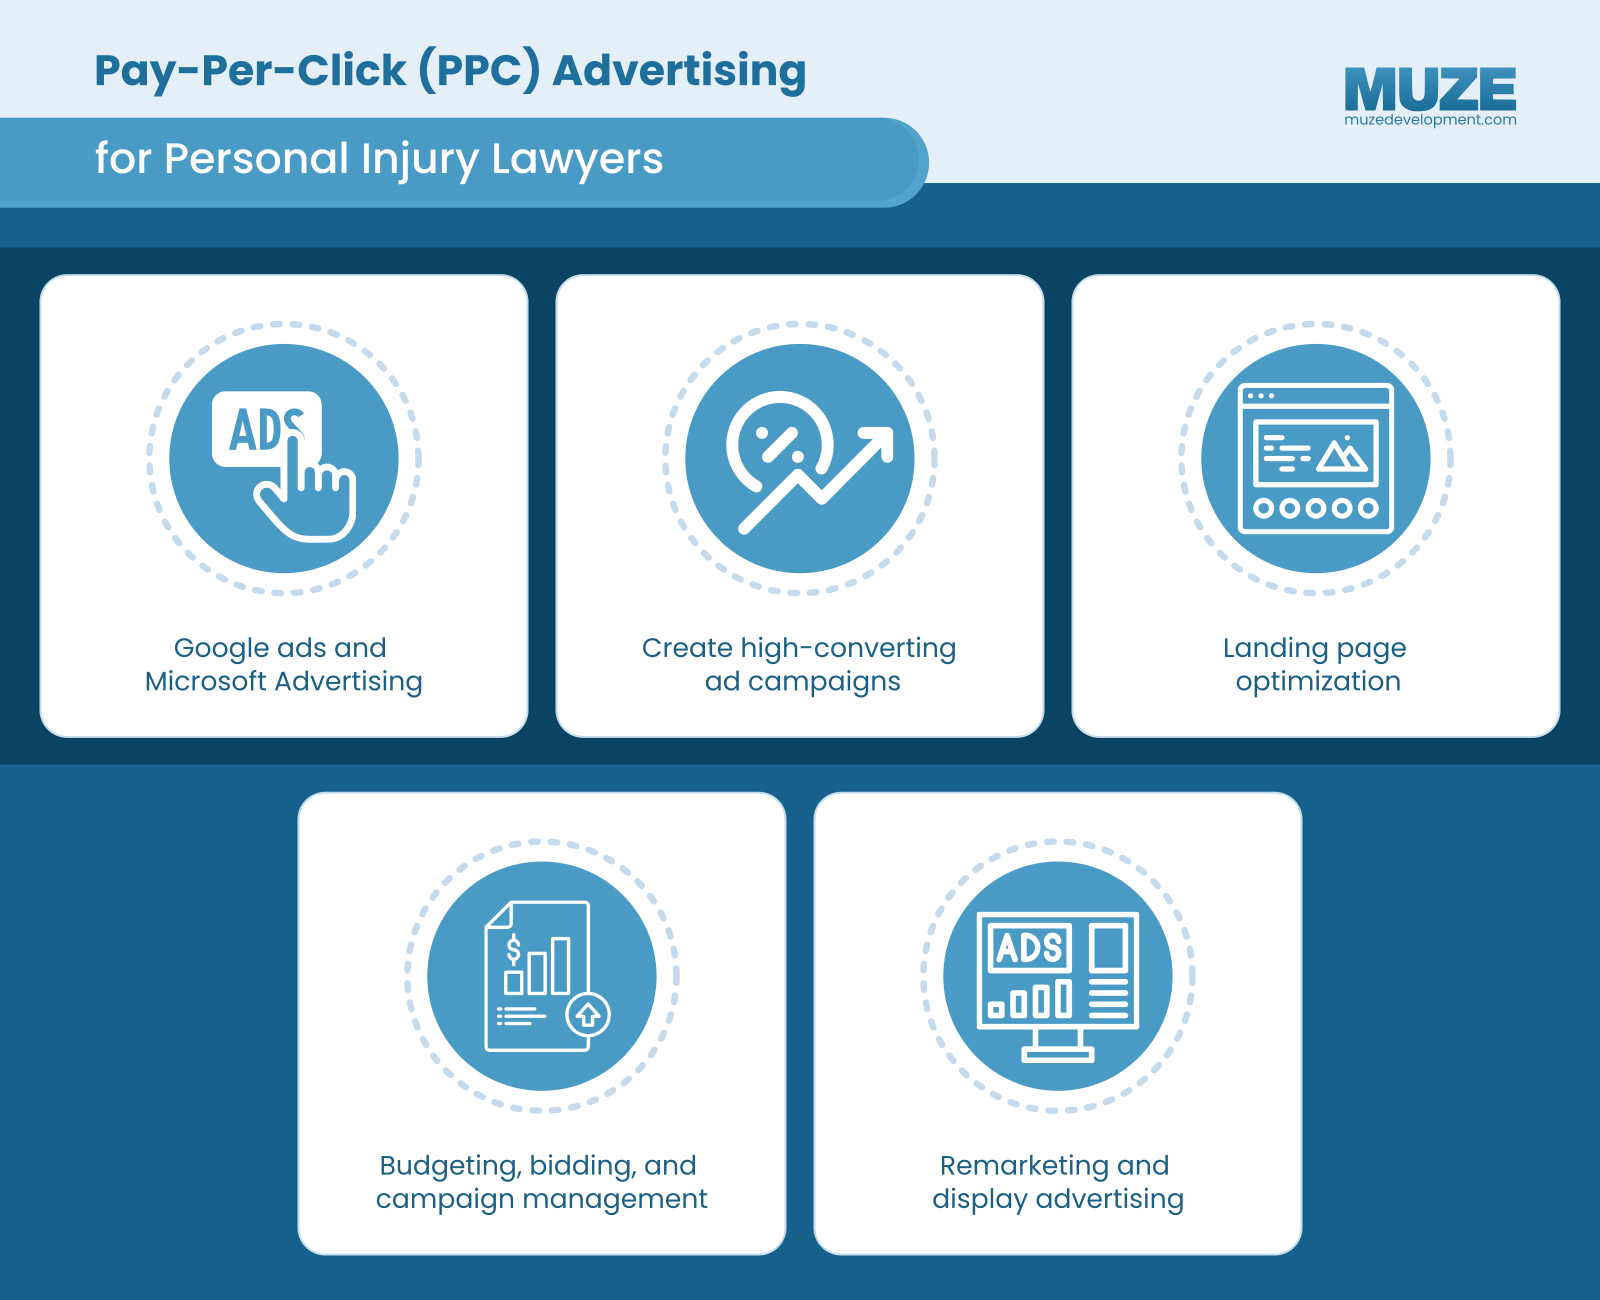 Pay-Per-Click (PPC) Advertising for Personal Injury Lawyers